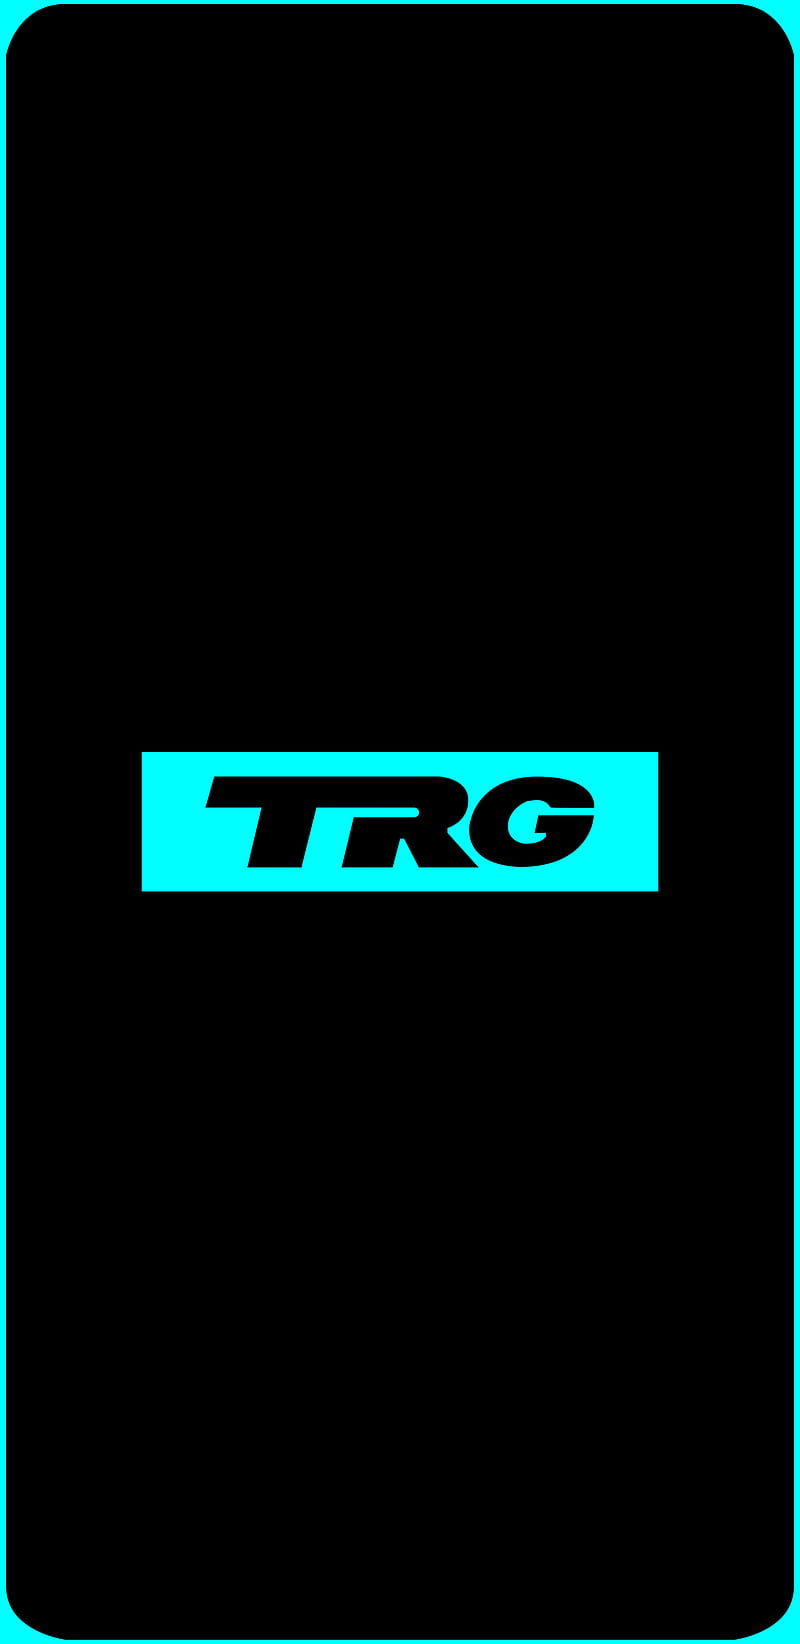 TRG Supreme S9, led, black, screen, station, pure, simple, cool, battery efficient, HD phone wallpaper